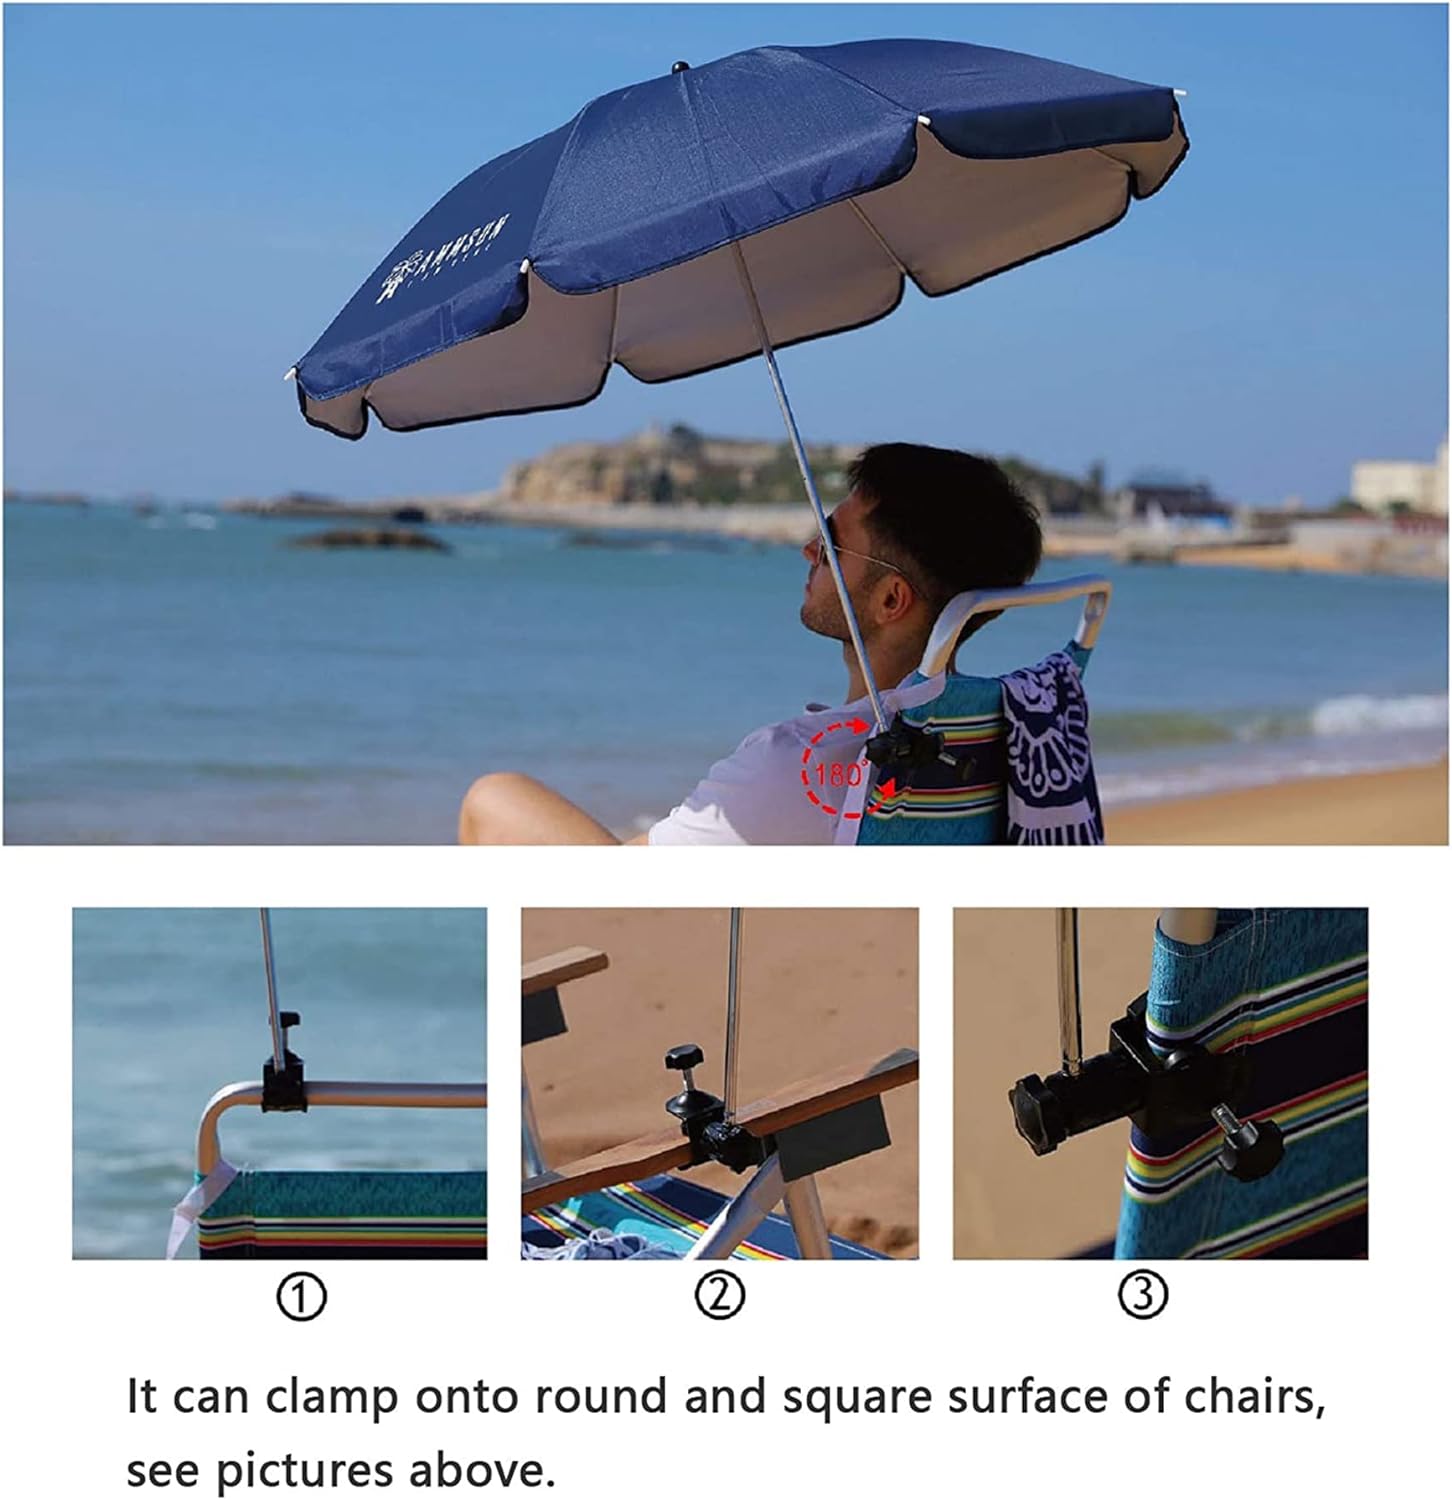 AMMSUN 43 inches Chair Umbrella with Universal Clamp Navy Blue